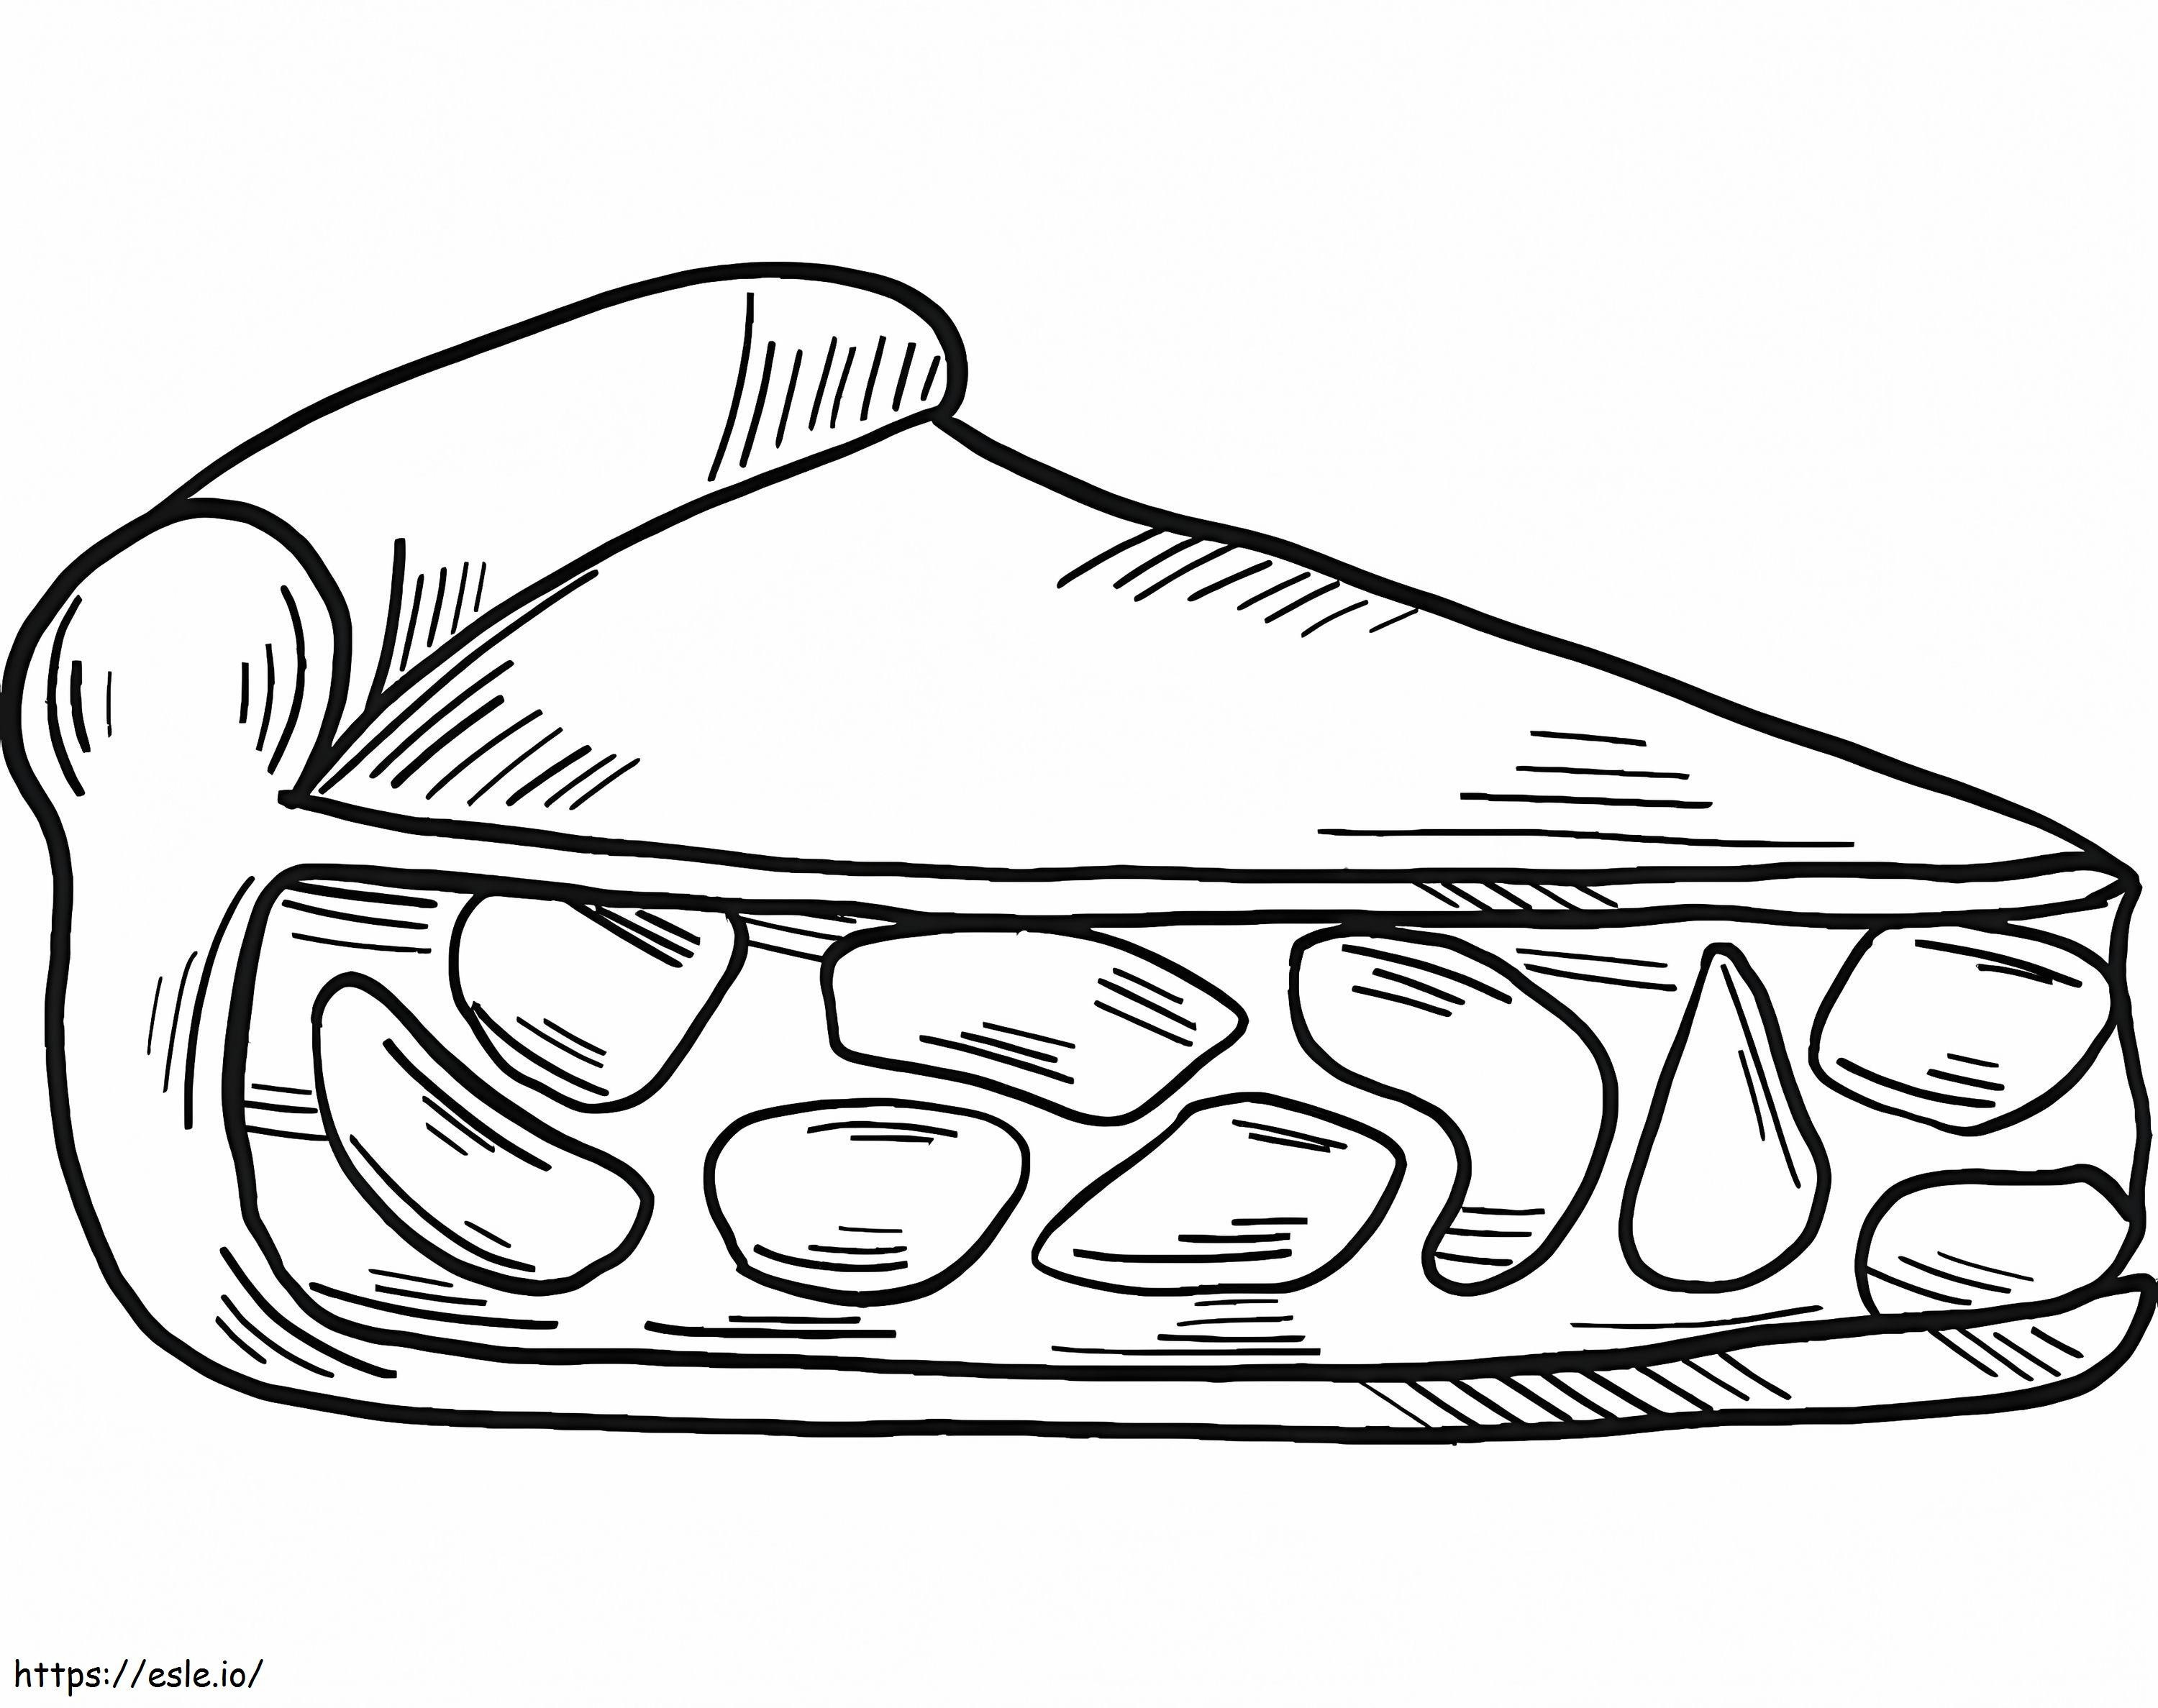 Apple Pie 1 coloring page